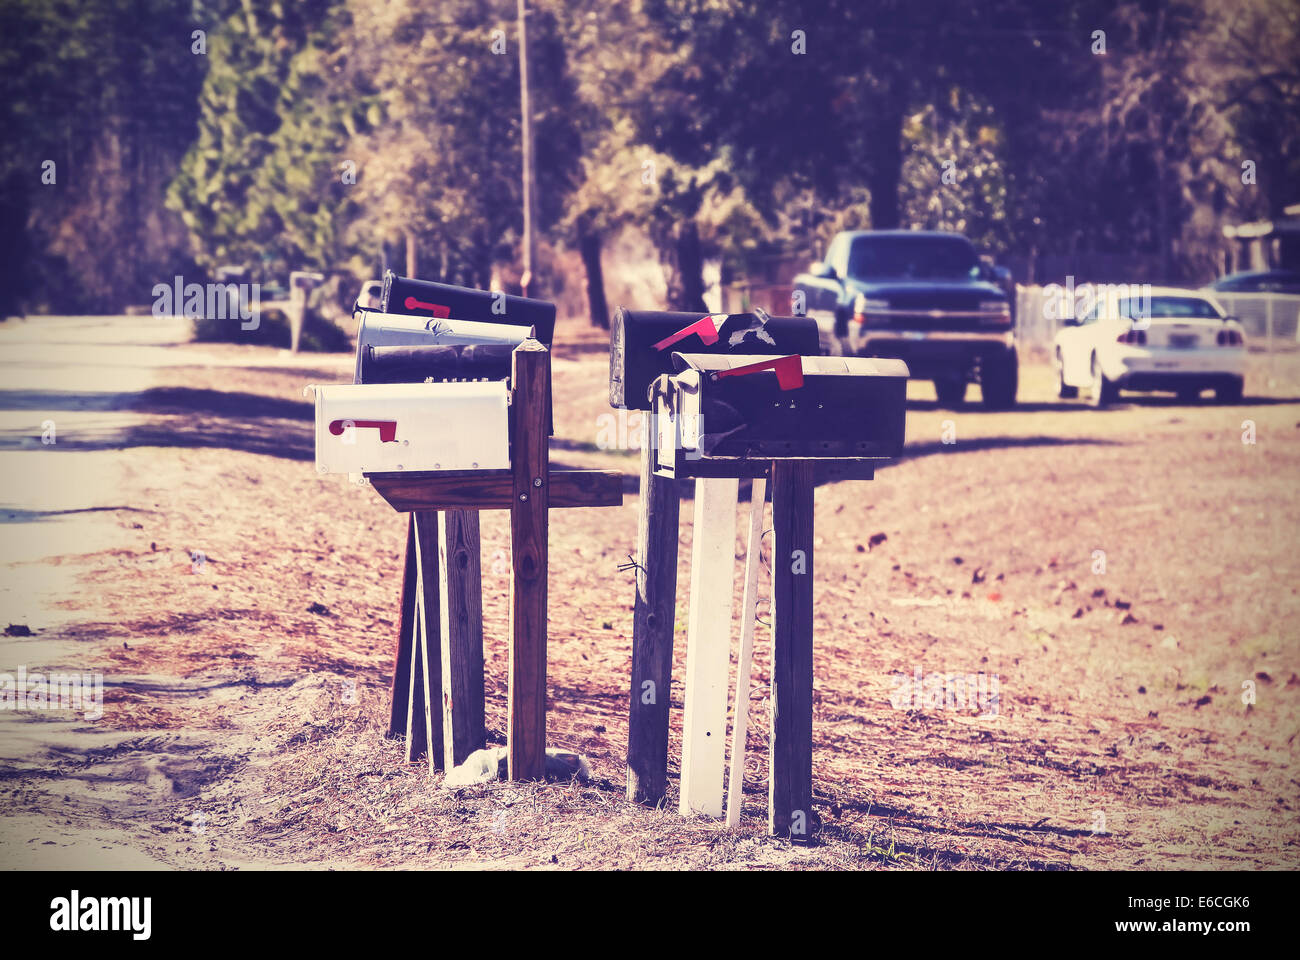 Vintage picture of mail boxes, rural area, USA. Stock Photo